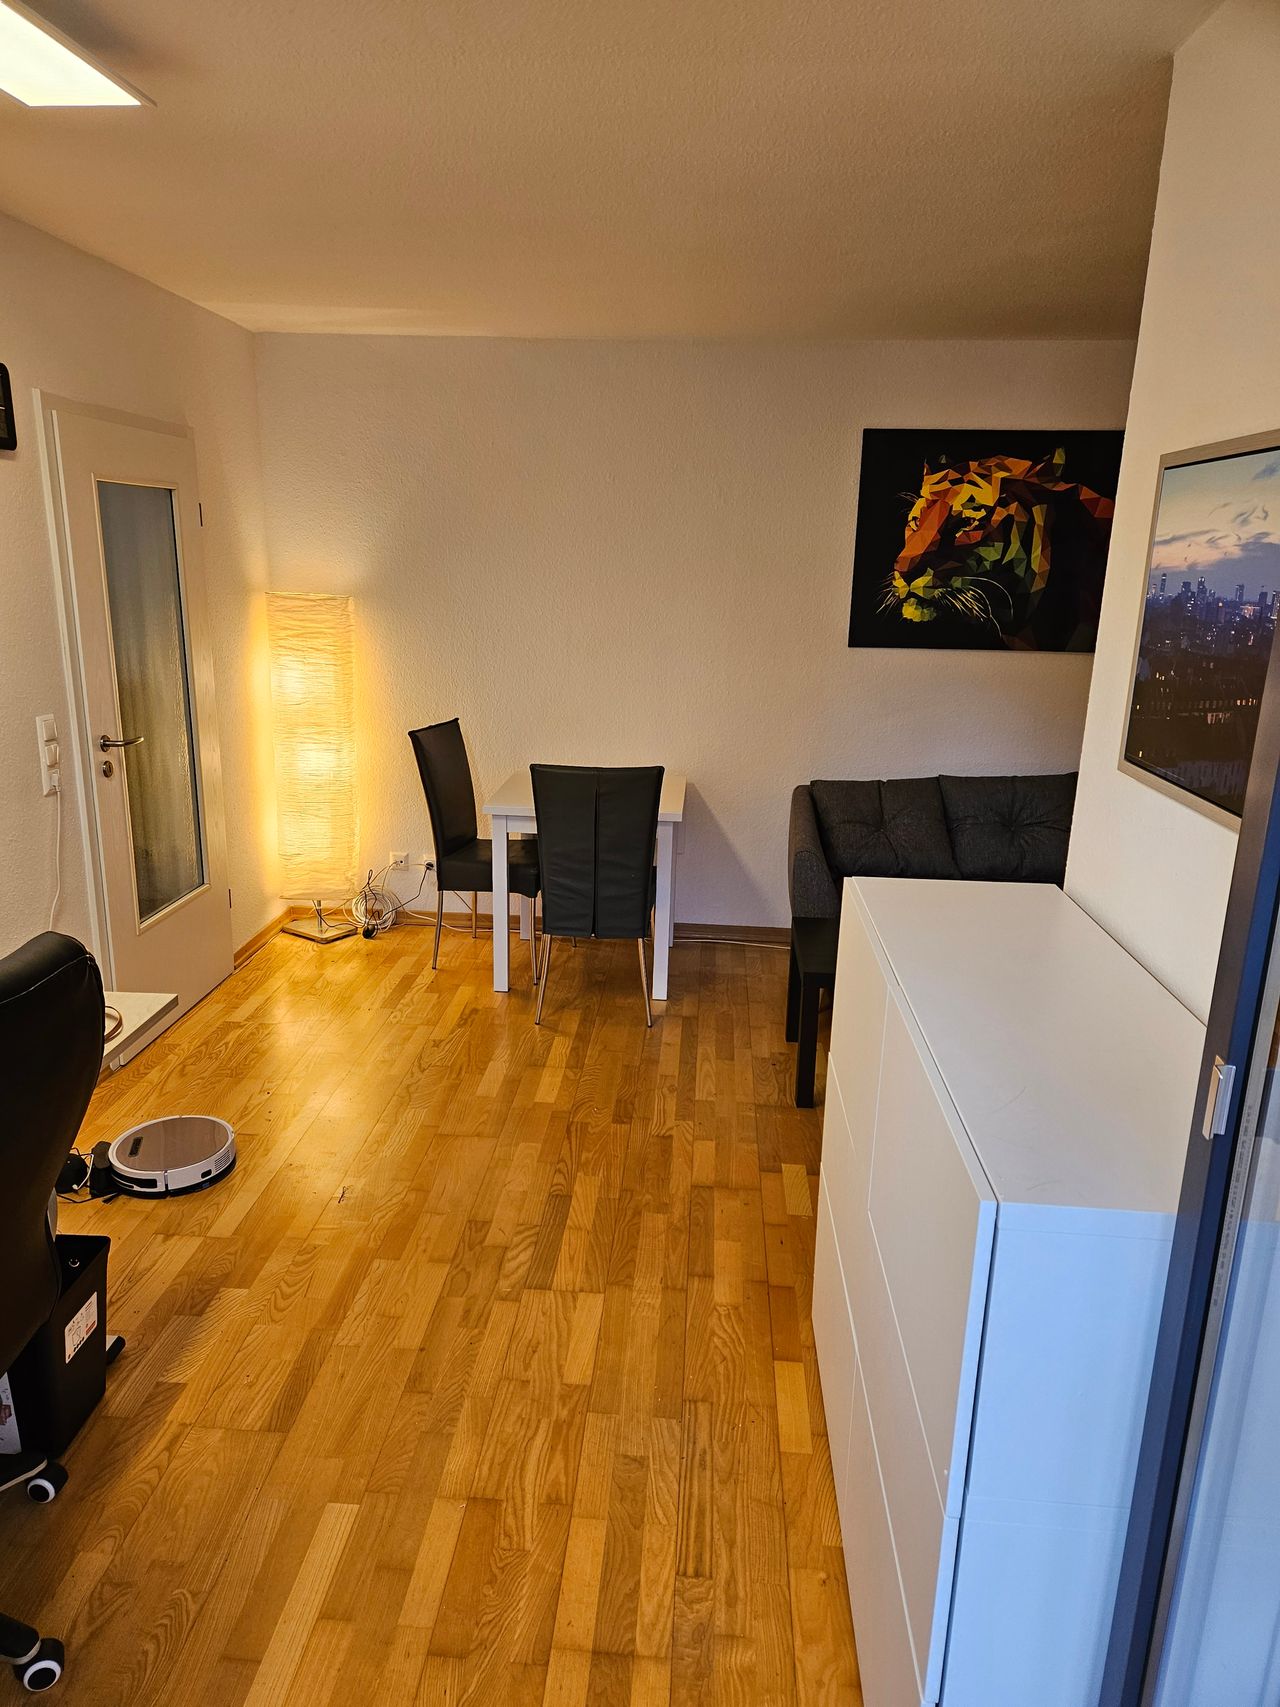 Cozy 3-room apartment close to Skyline Plaza - in the heart of Frankfurt